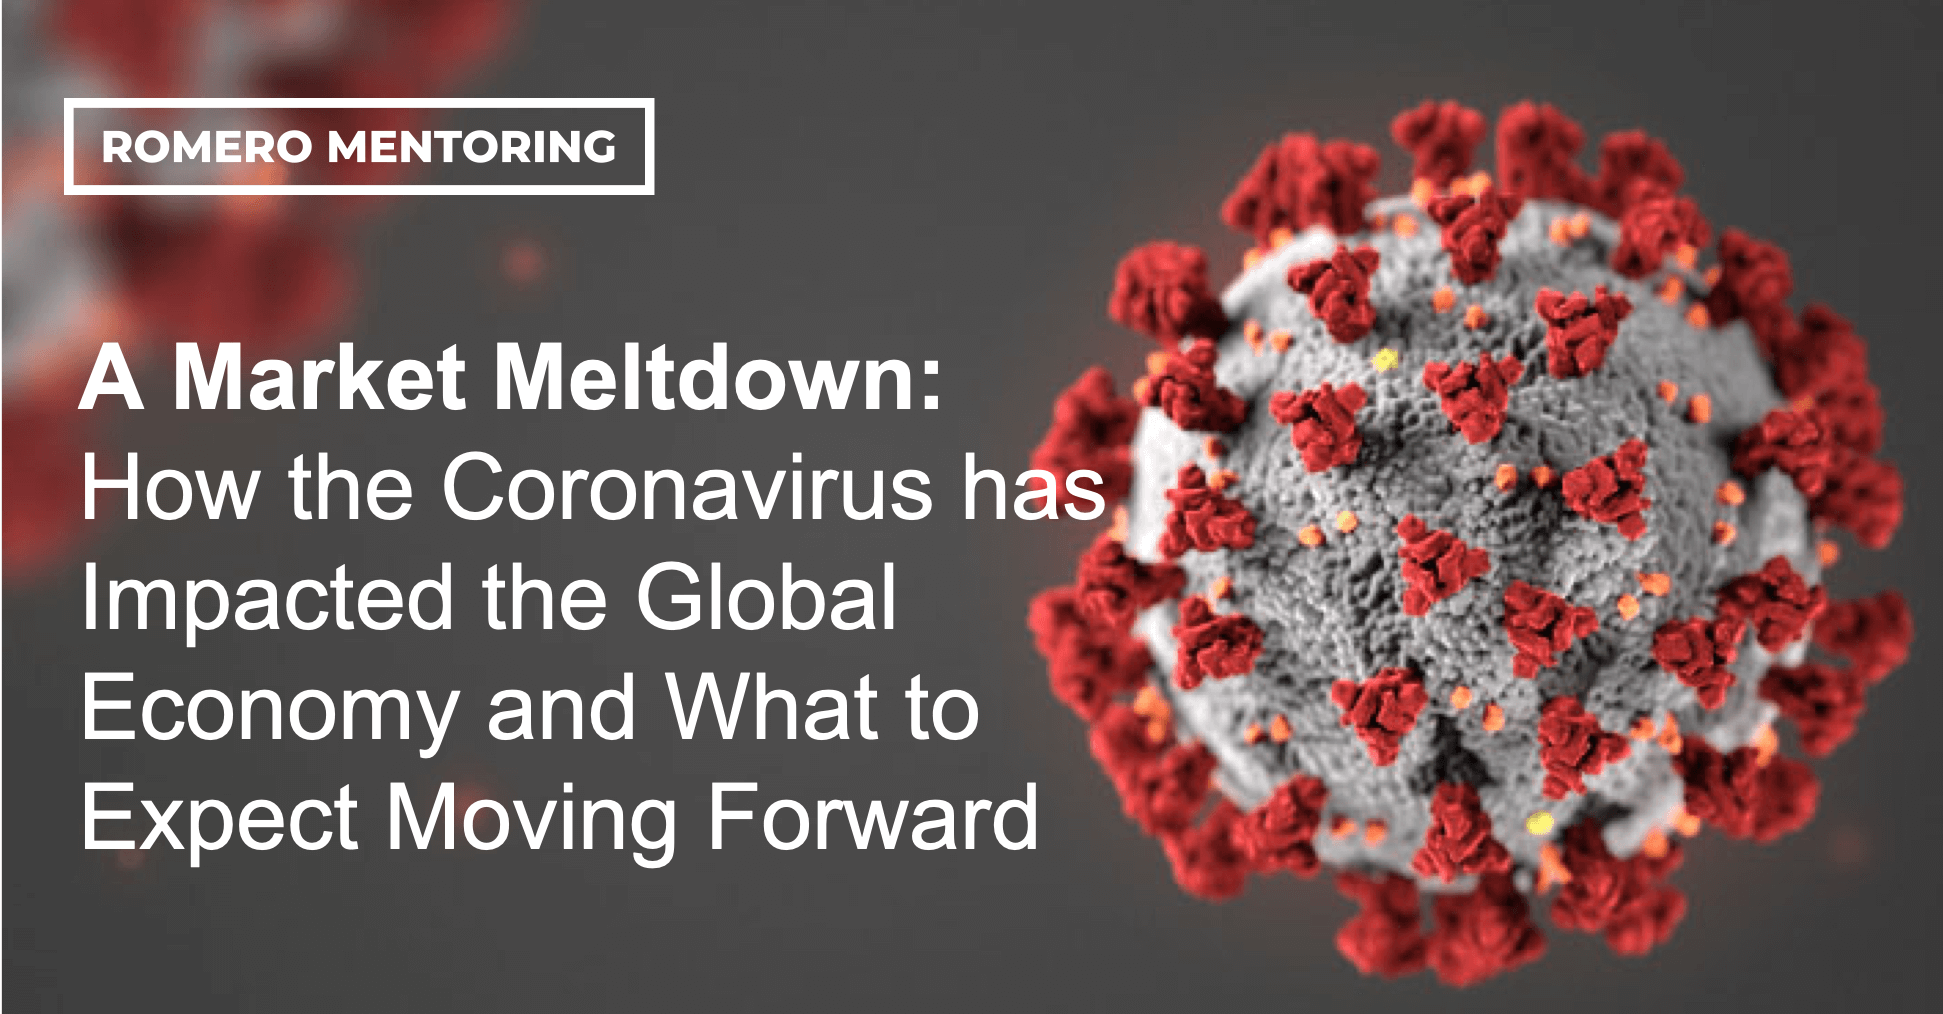 How the Coronavirus has Impacted the Global Economy and What to Expect Moving Forward